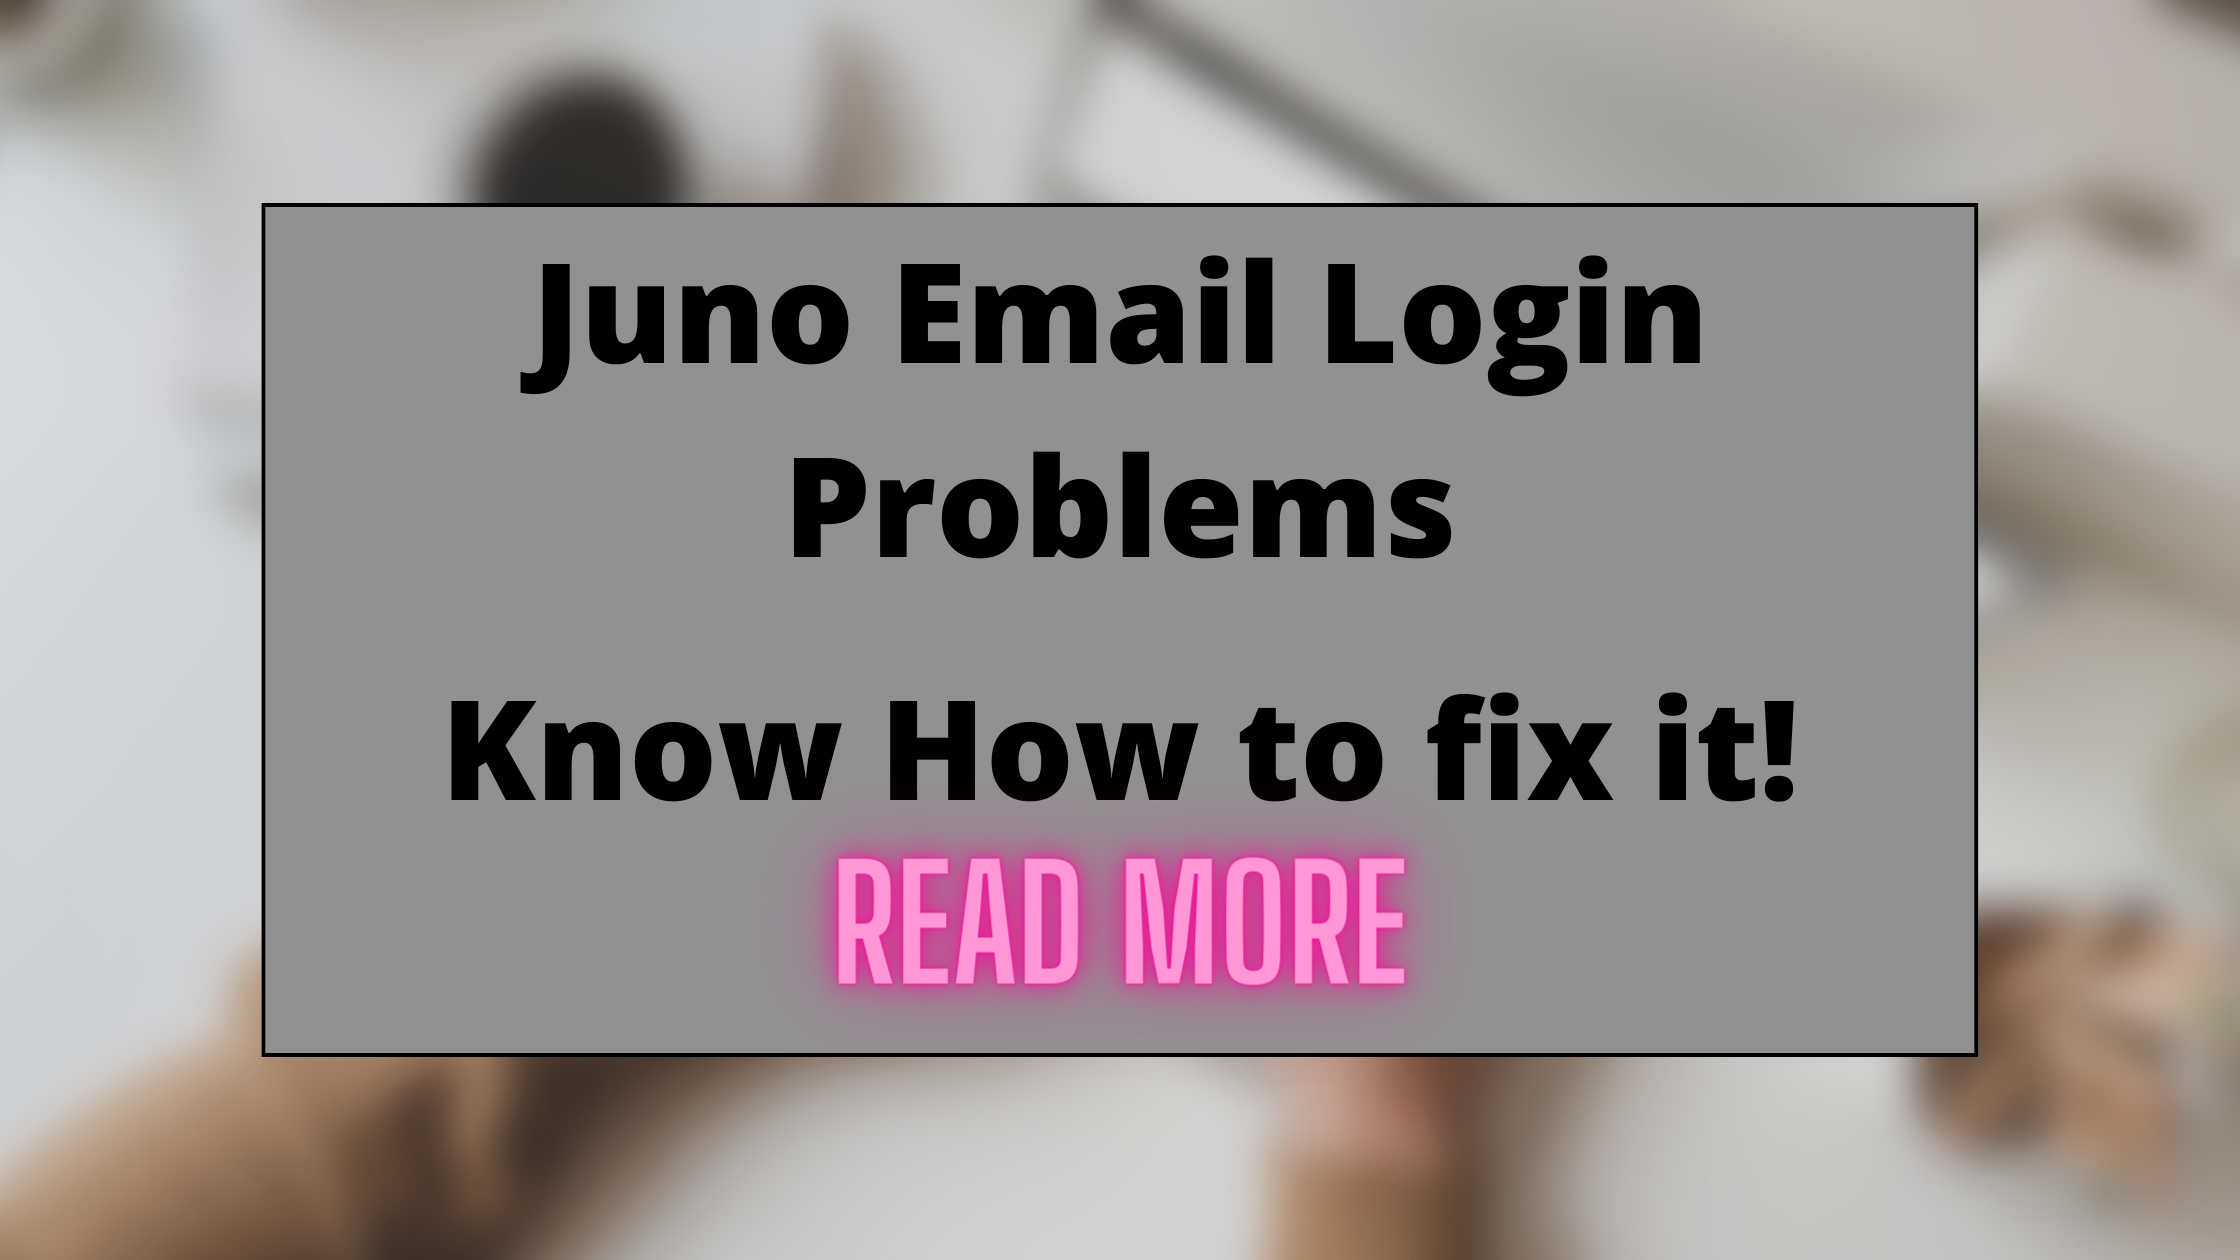 Juno Email Login Problems